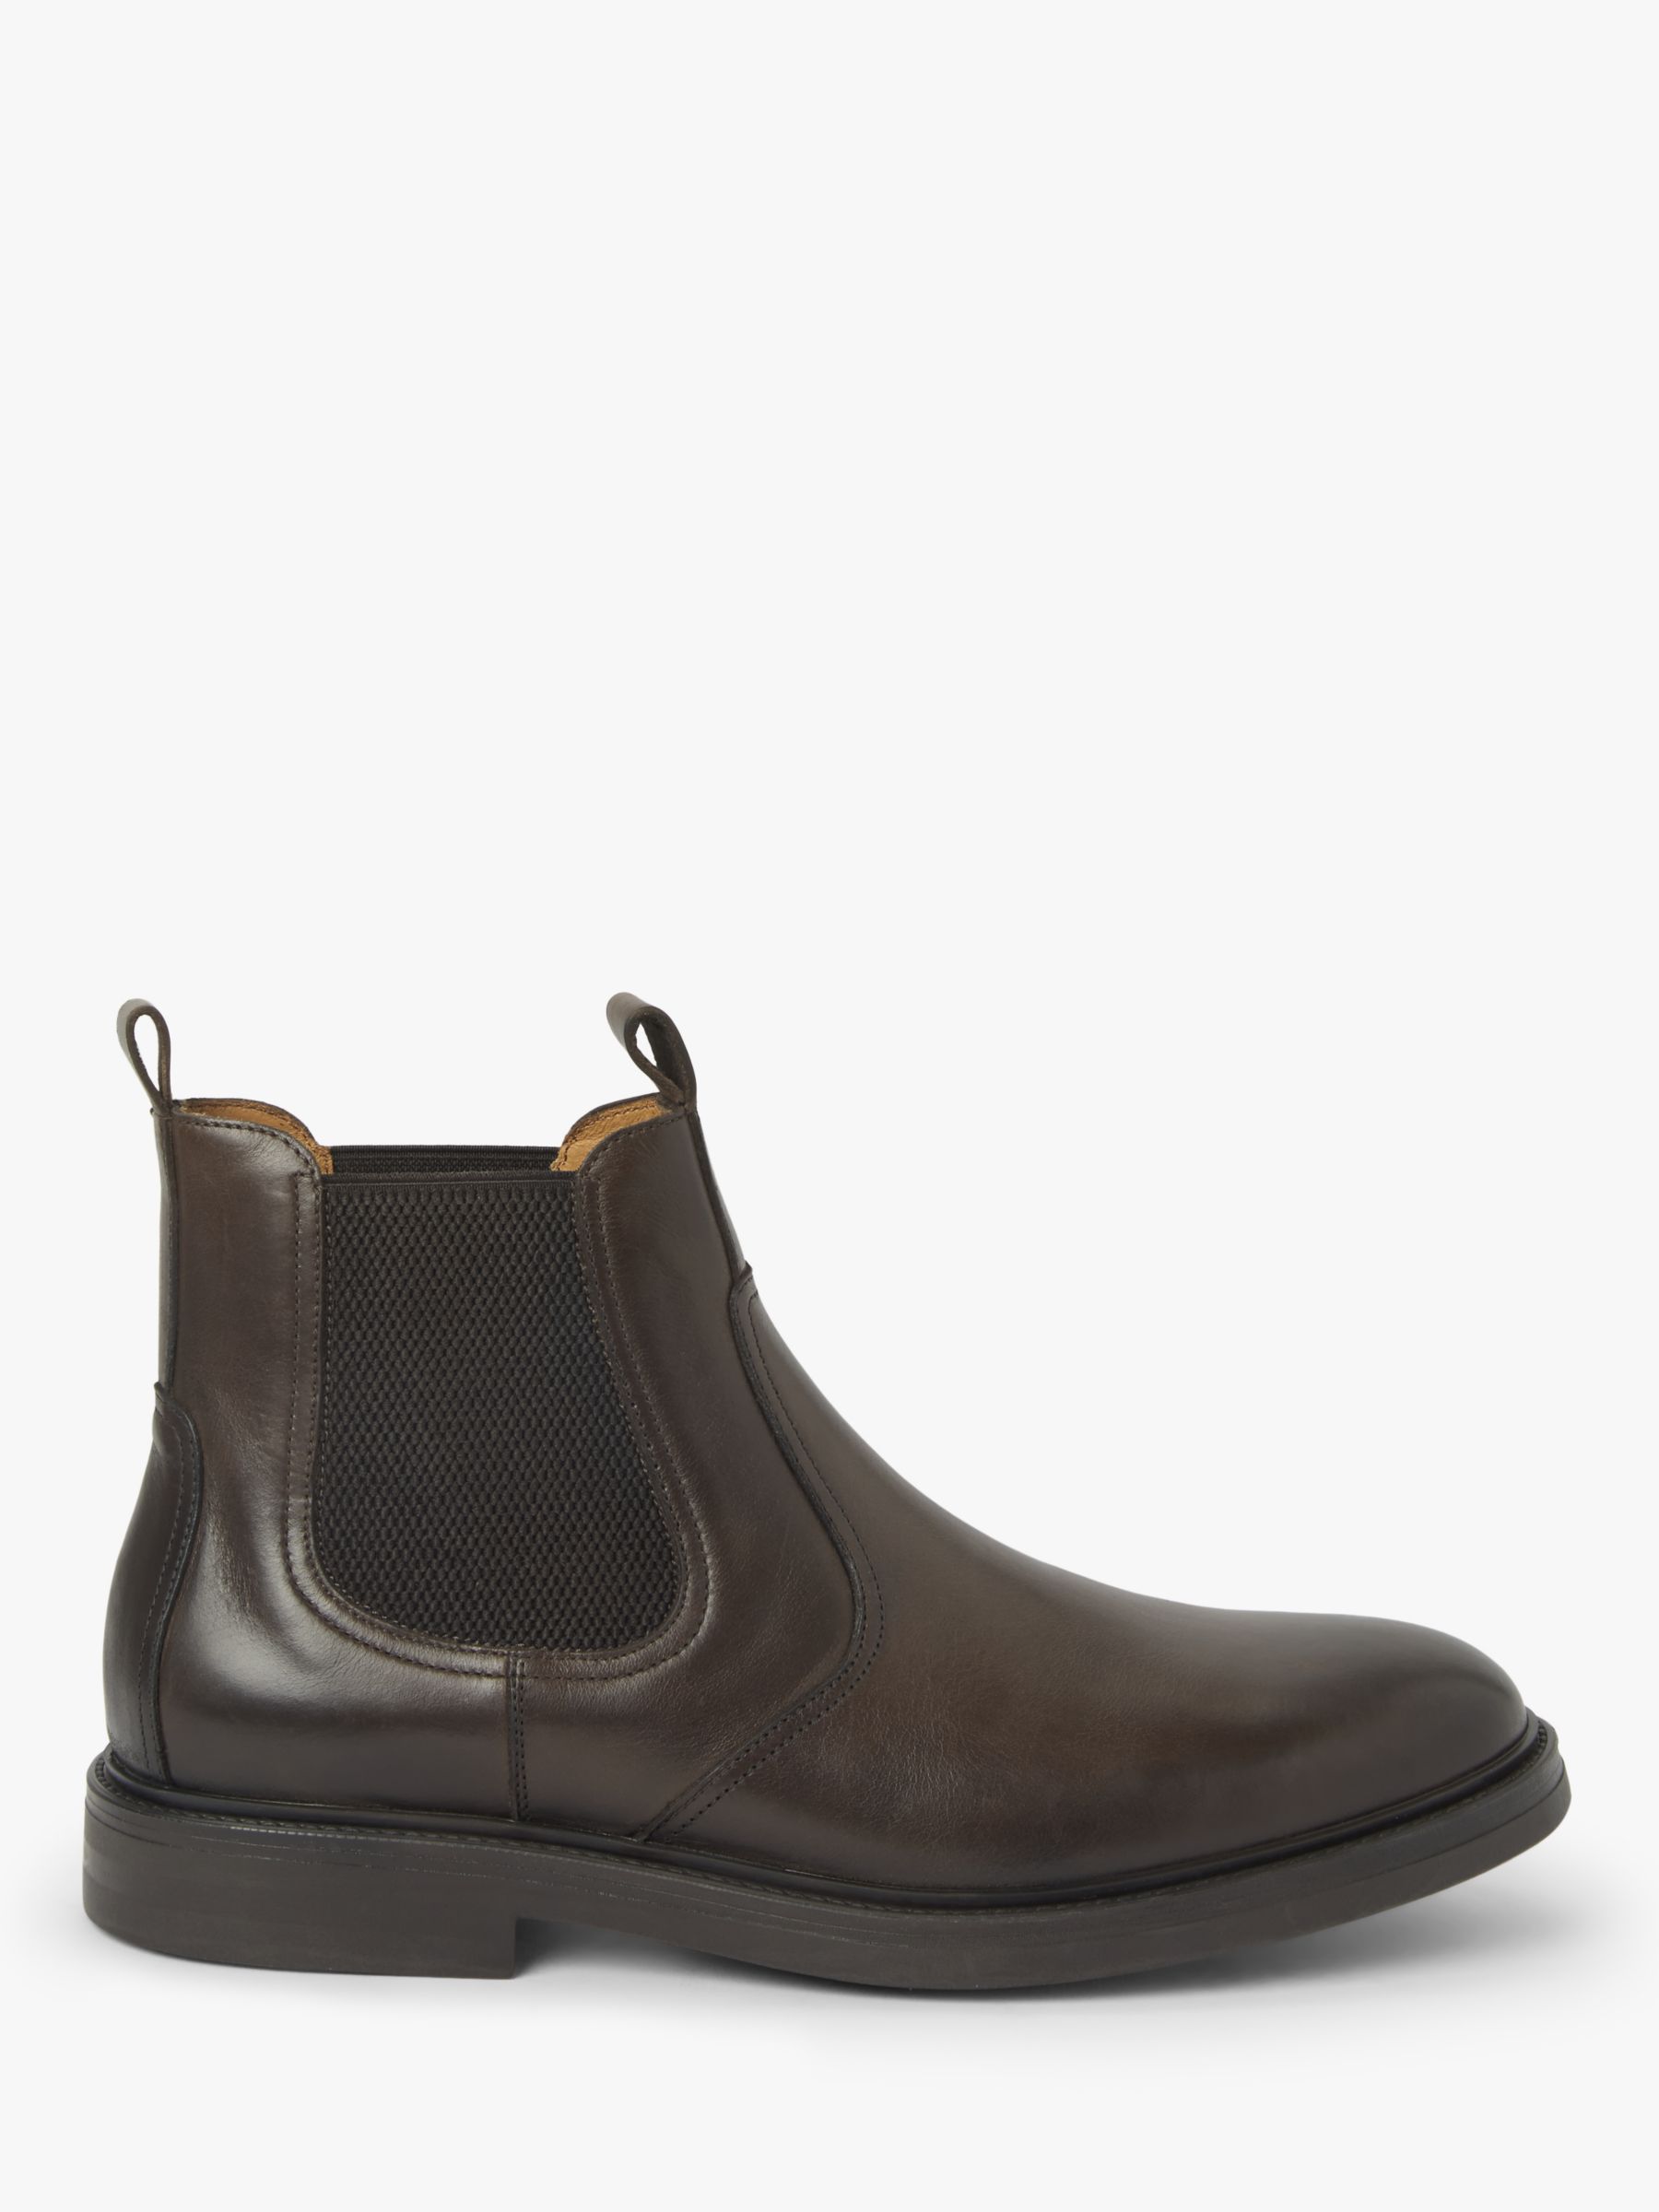 John Lewis & Partners Stiles Leather Chelsea Boots, Brown at John Lewis ...